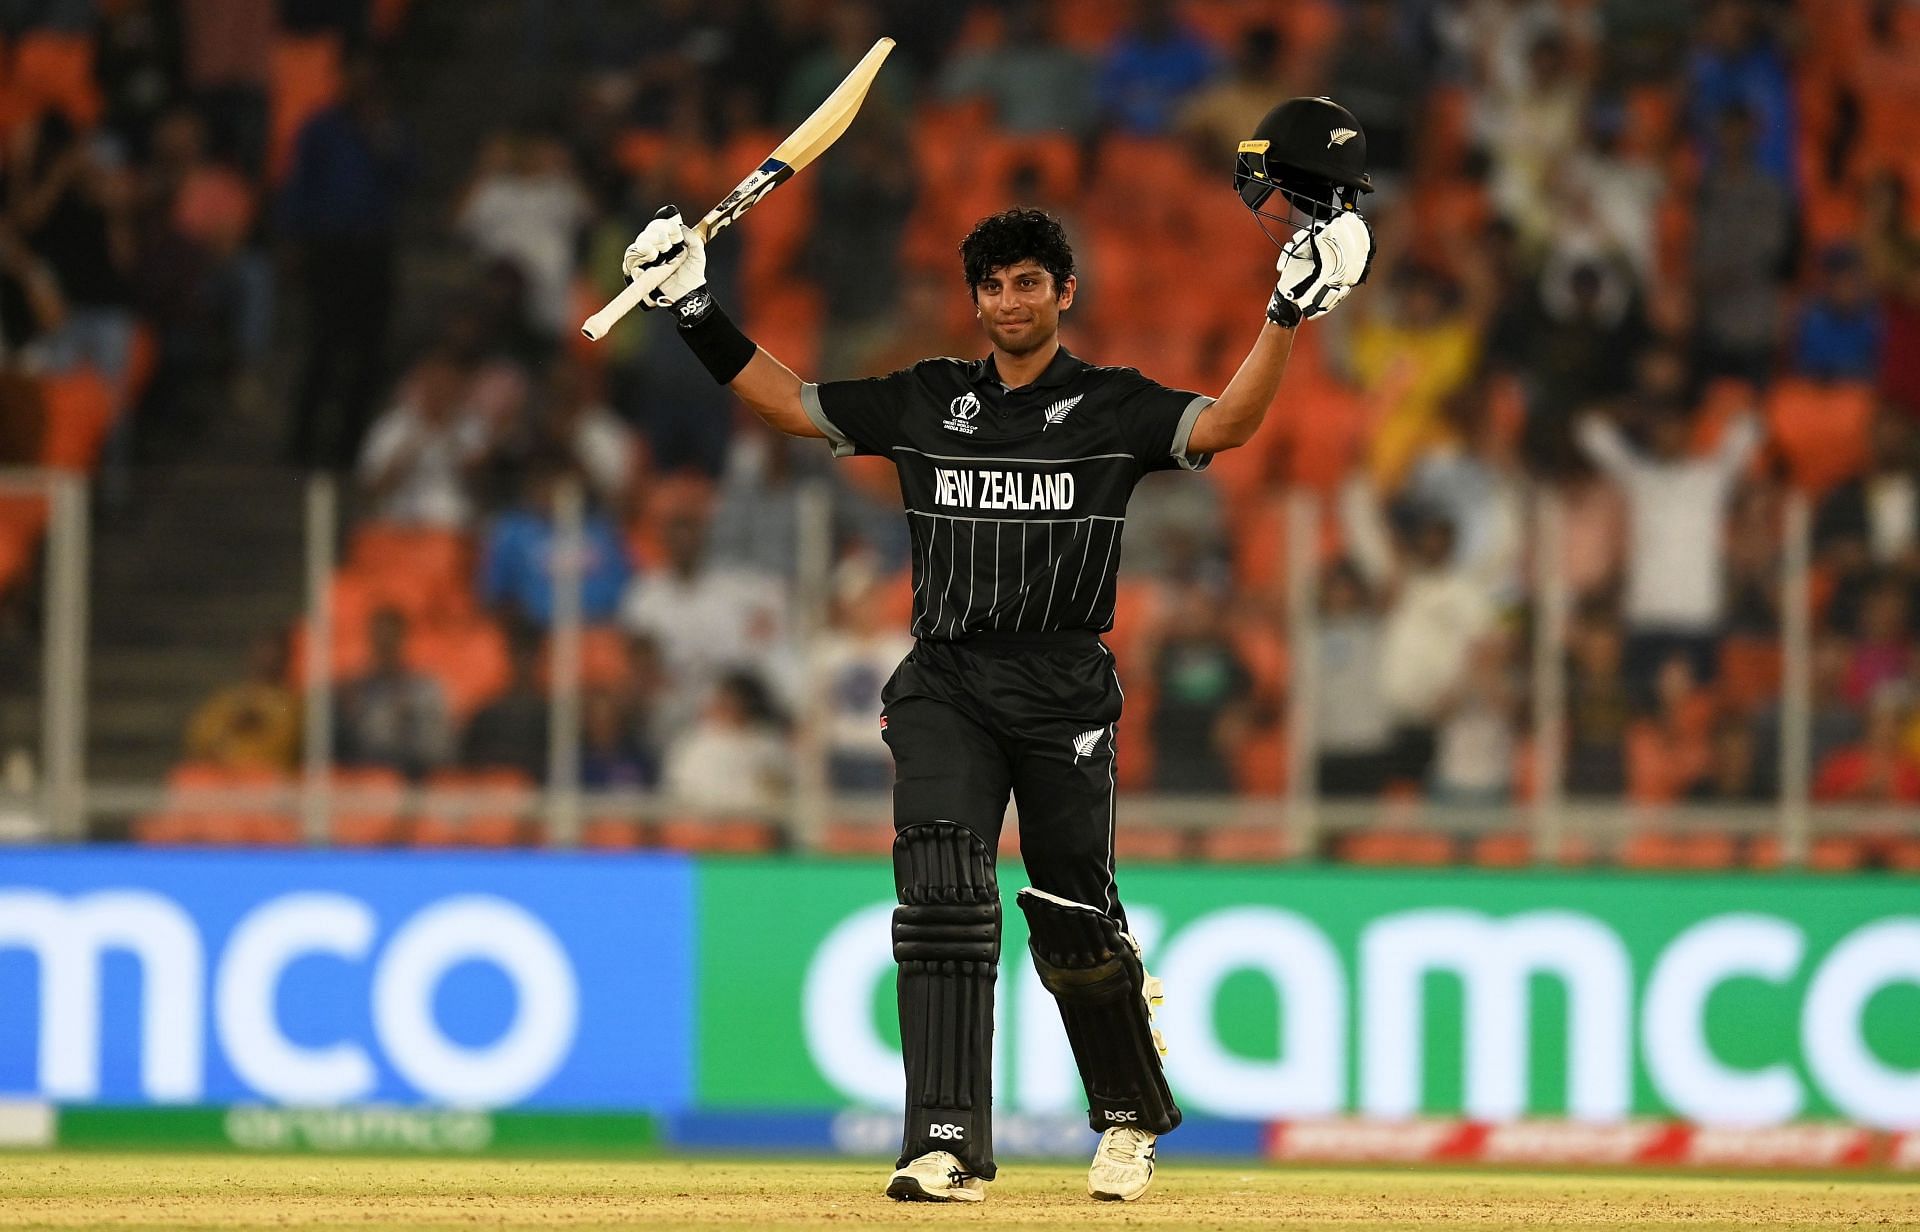 Rachin Ravindra - the new hero for New Zealand [Getty Images]